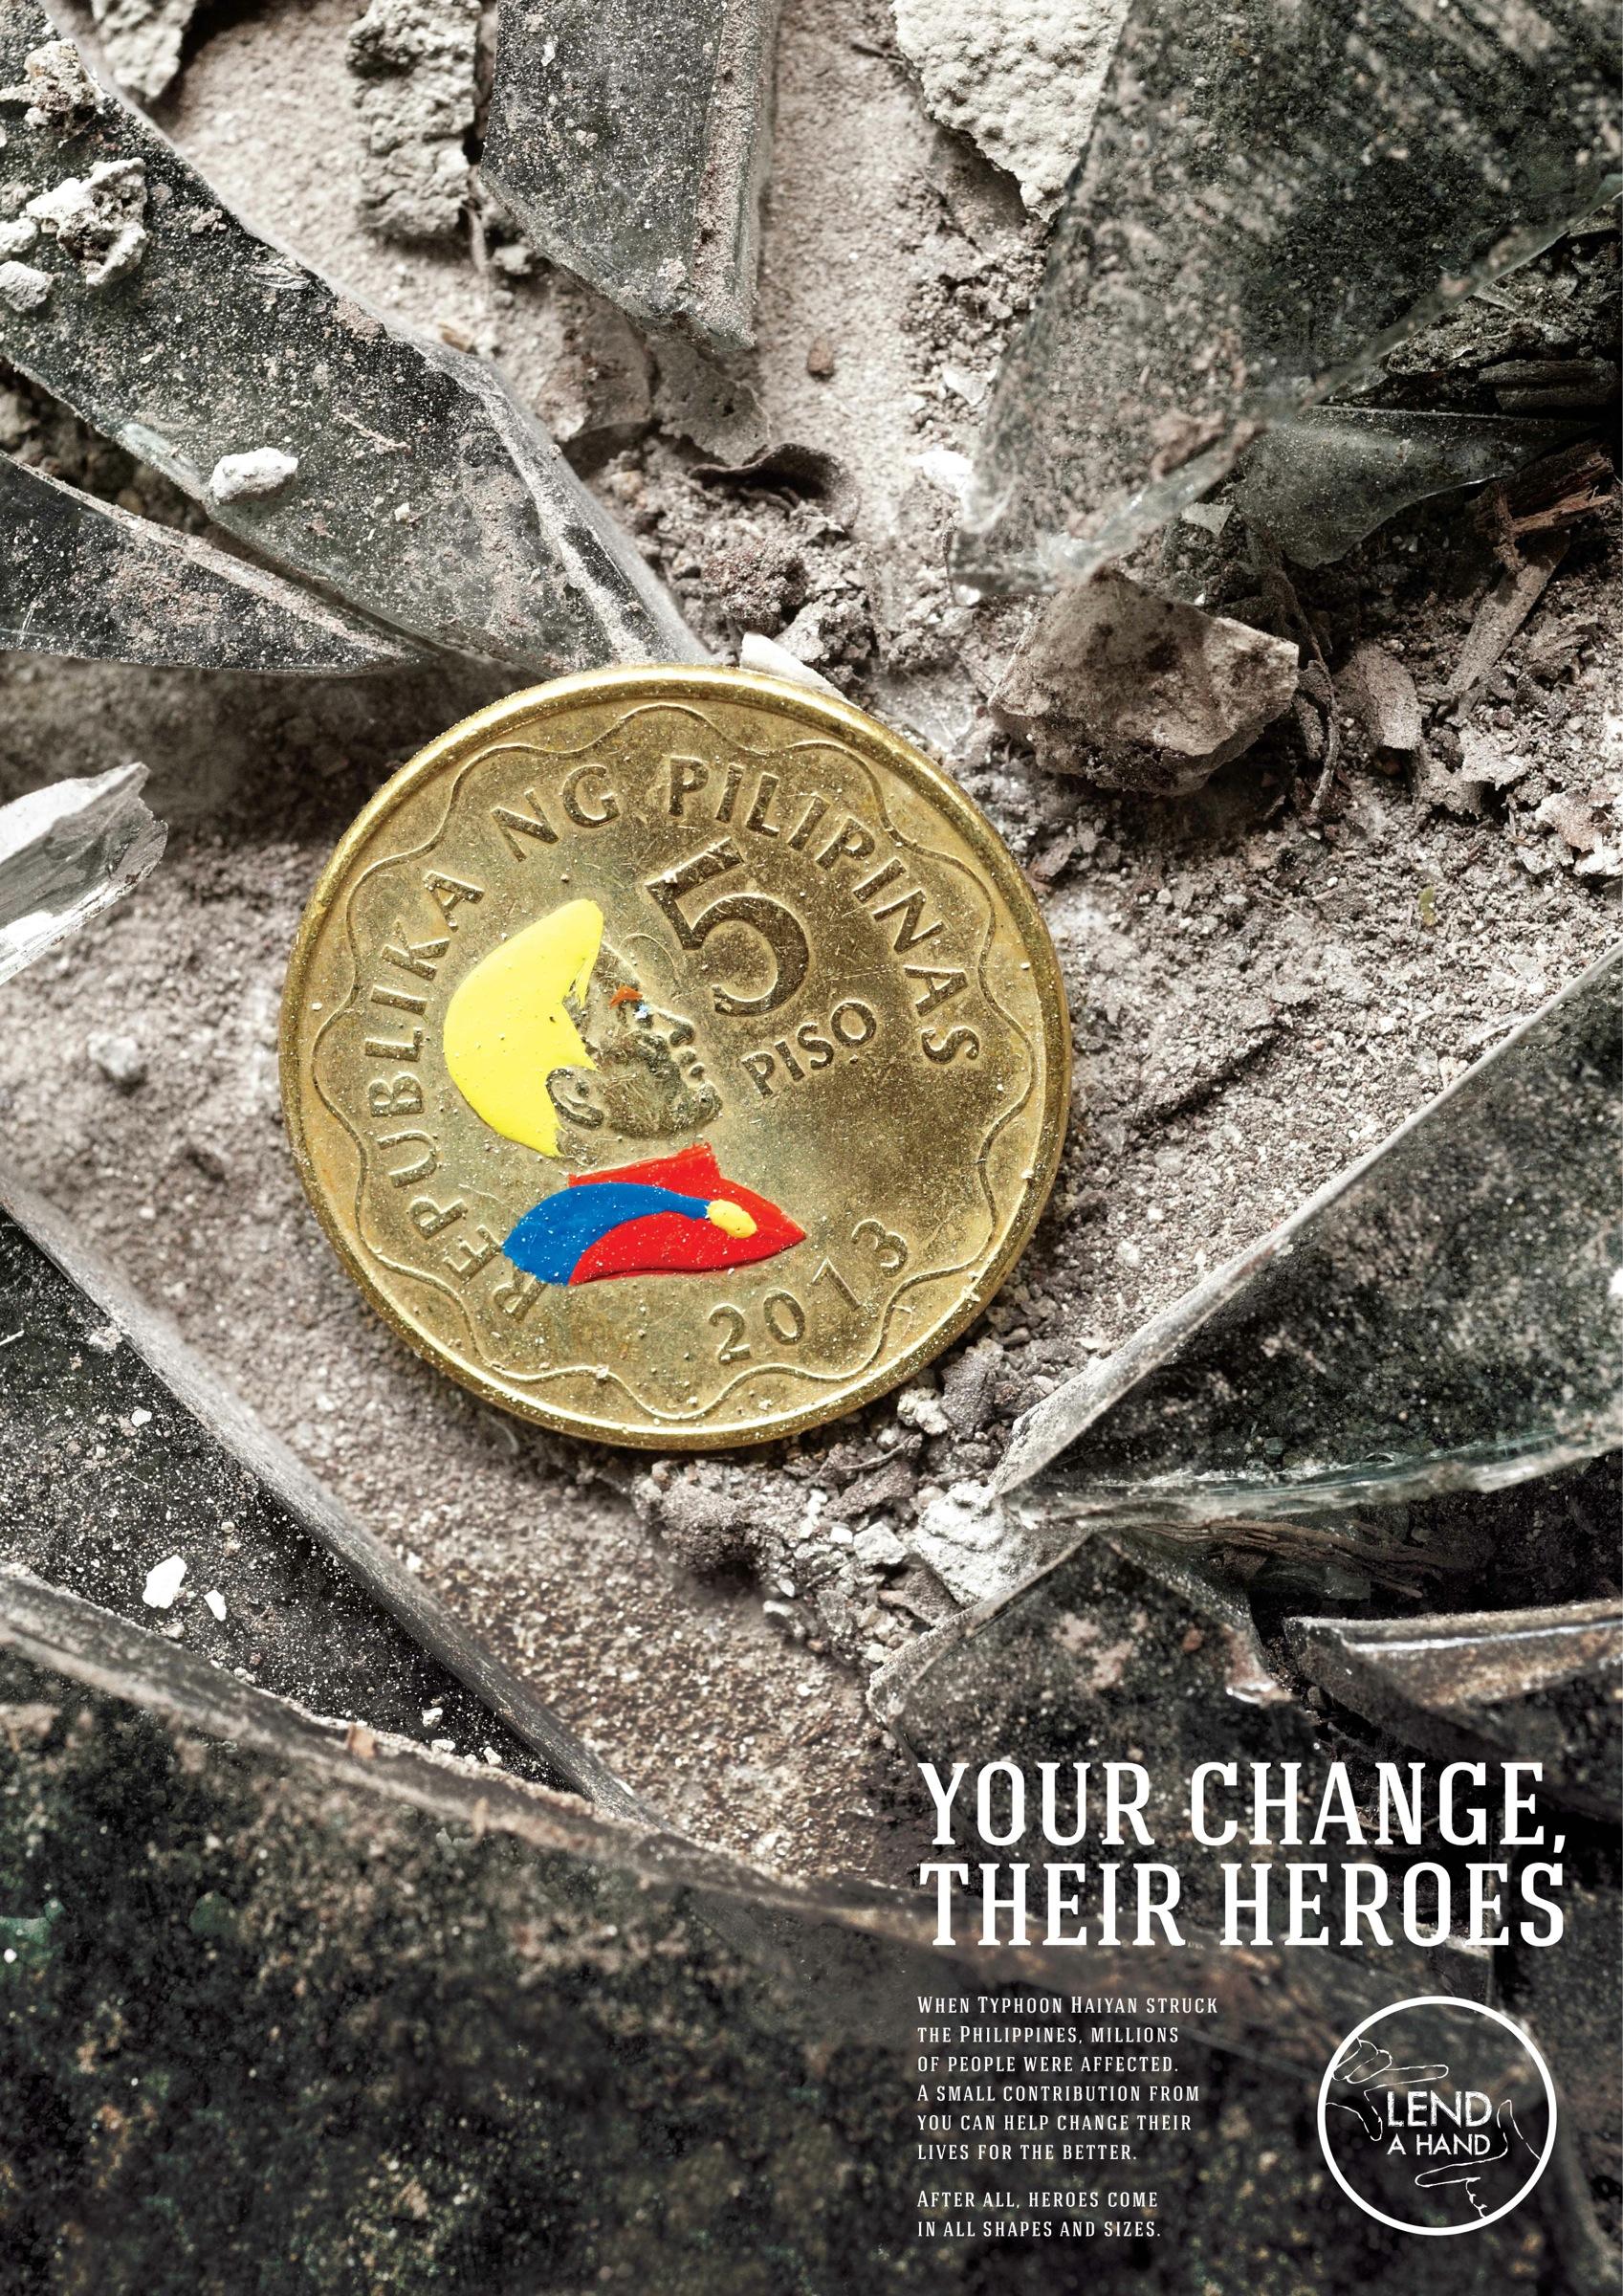 mixed_media_illustration_andre_levy_zhion_coin_tales_you_lose_superhero_typhoon_philippines_5_peso_poster_govt.jpg